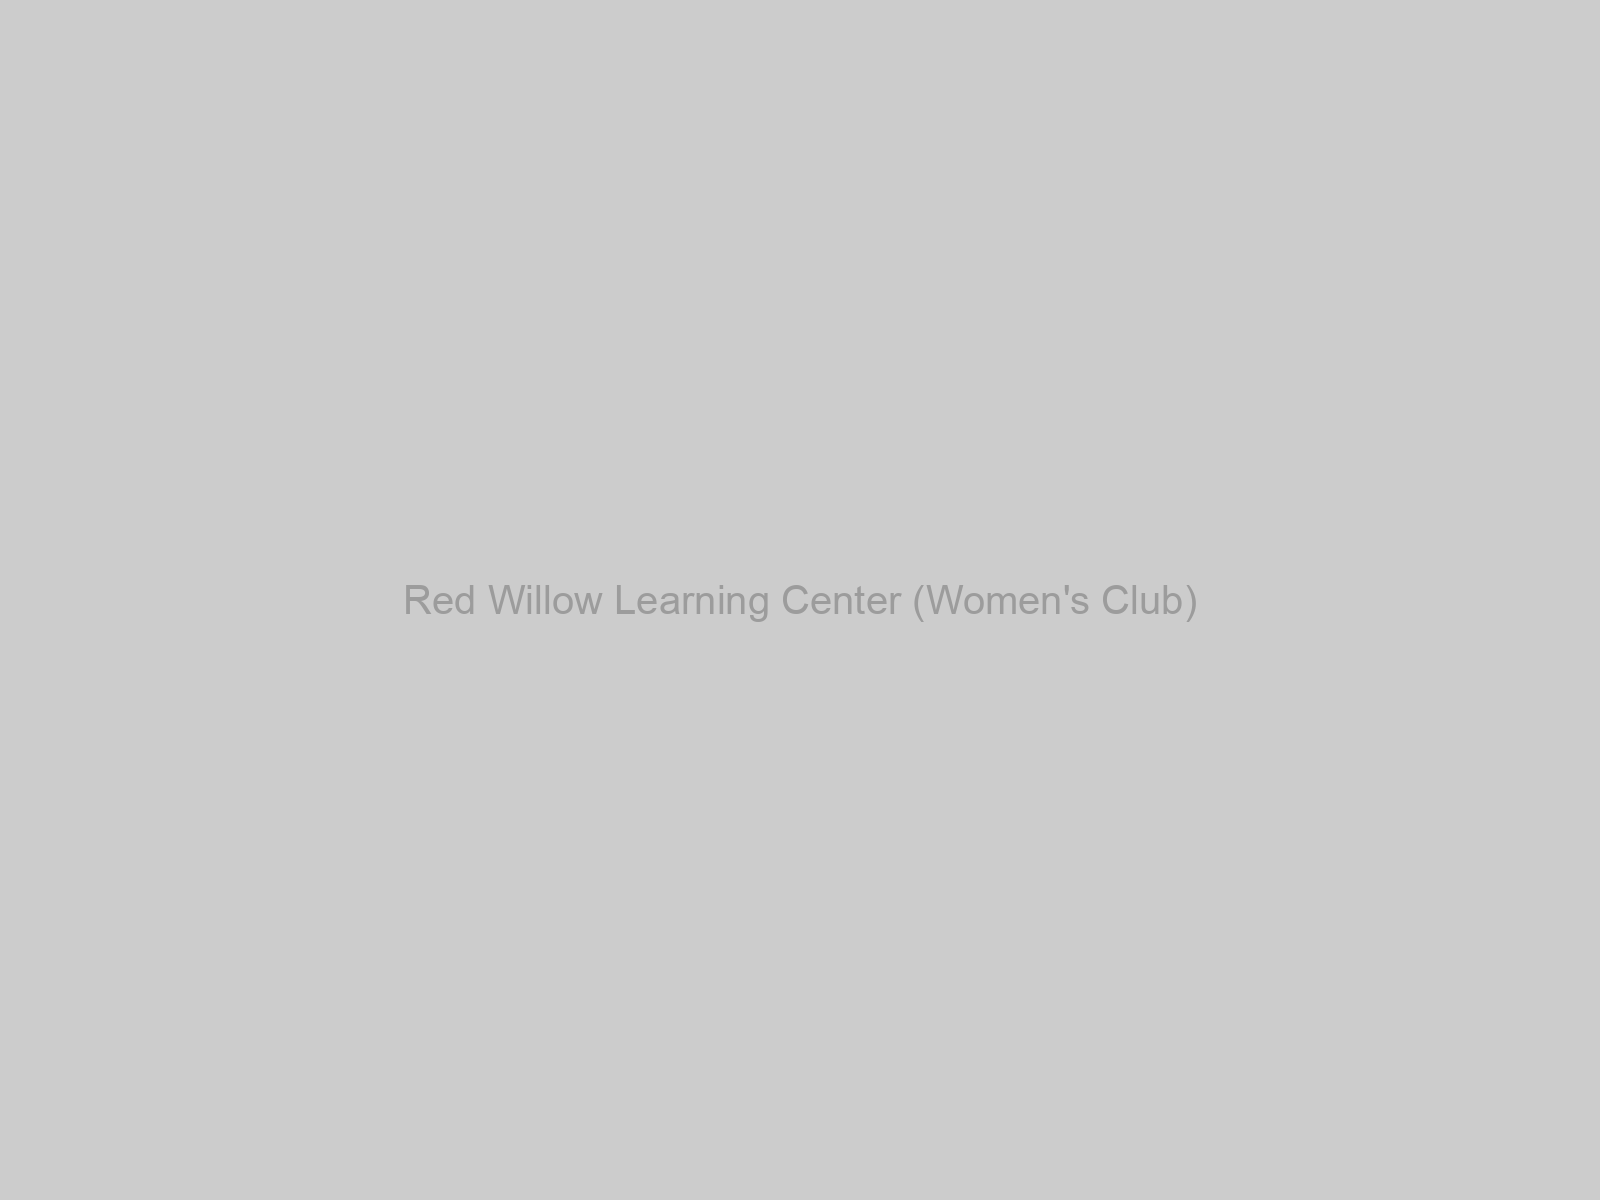 Red Willow Learning Center (Women's Club)